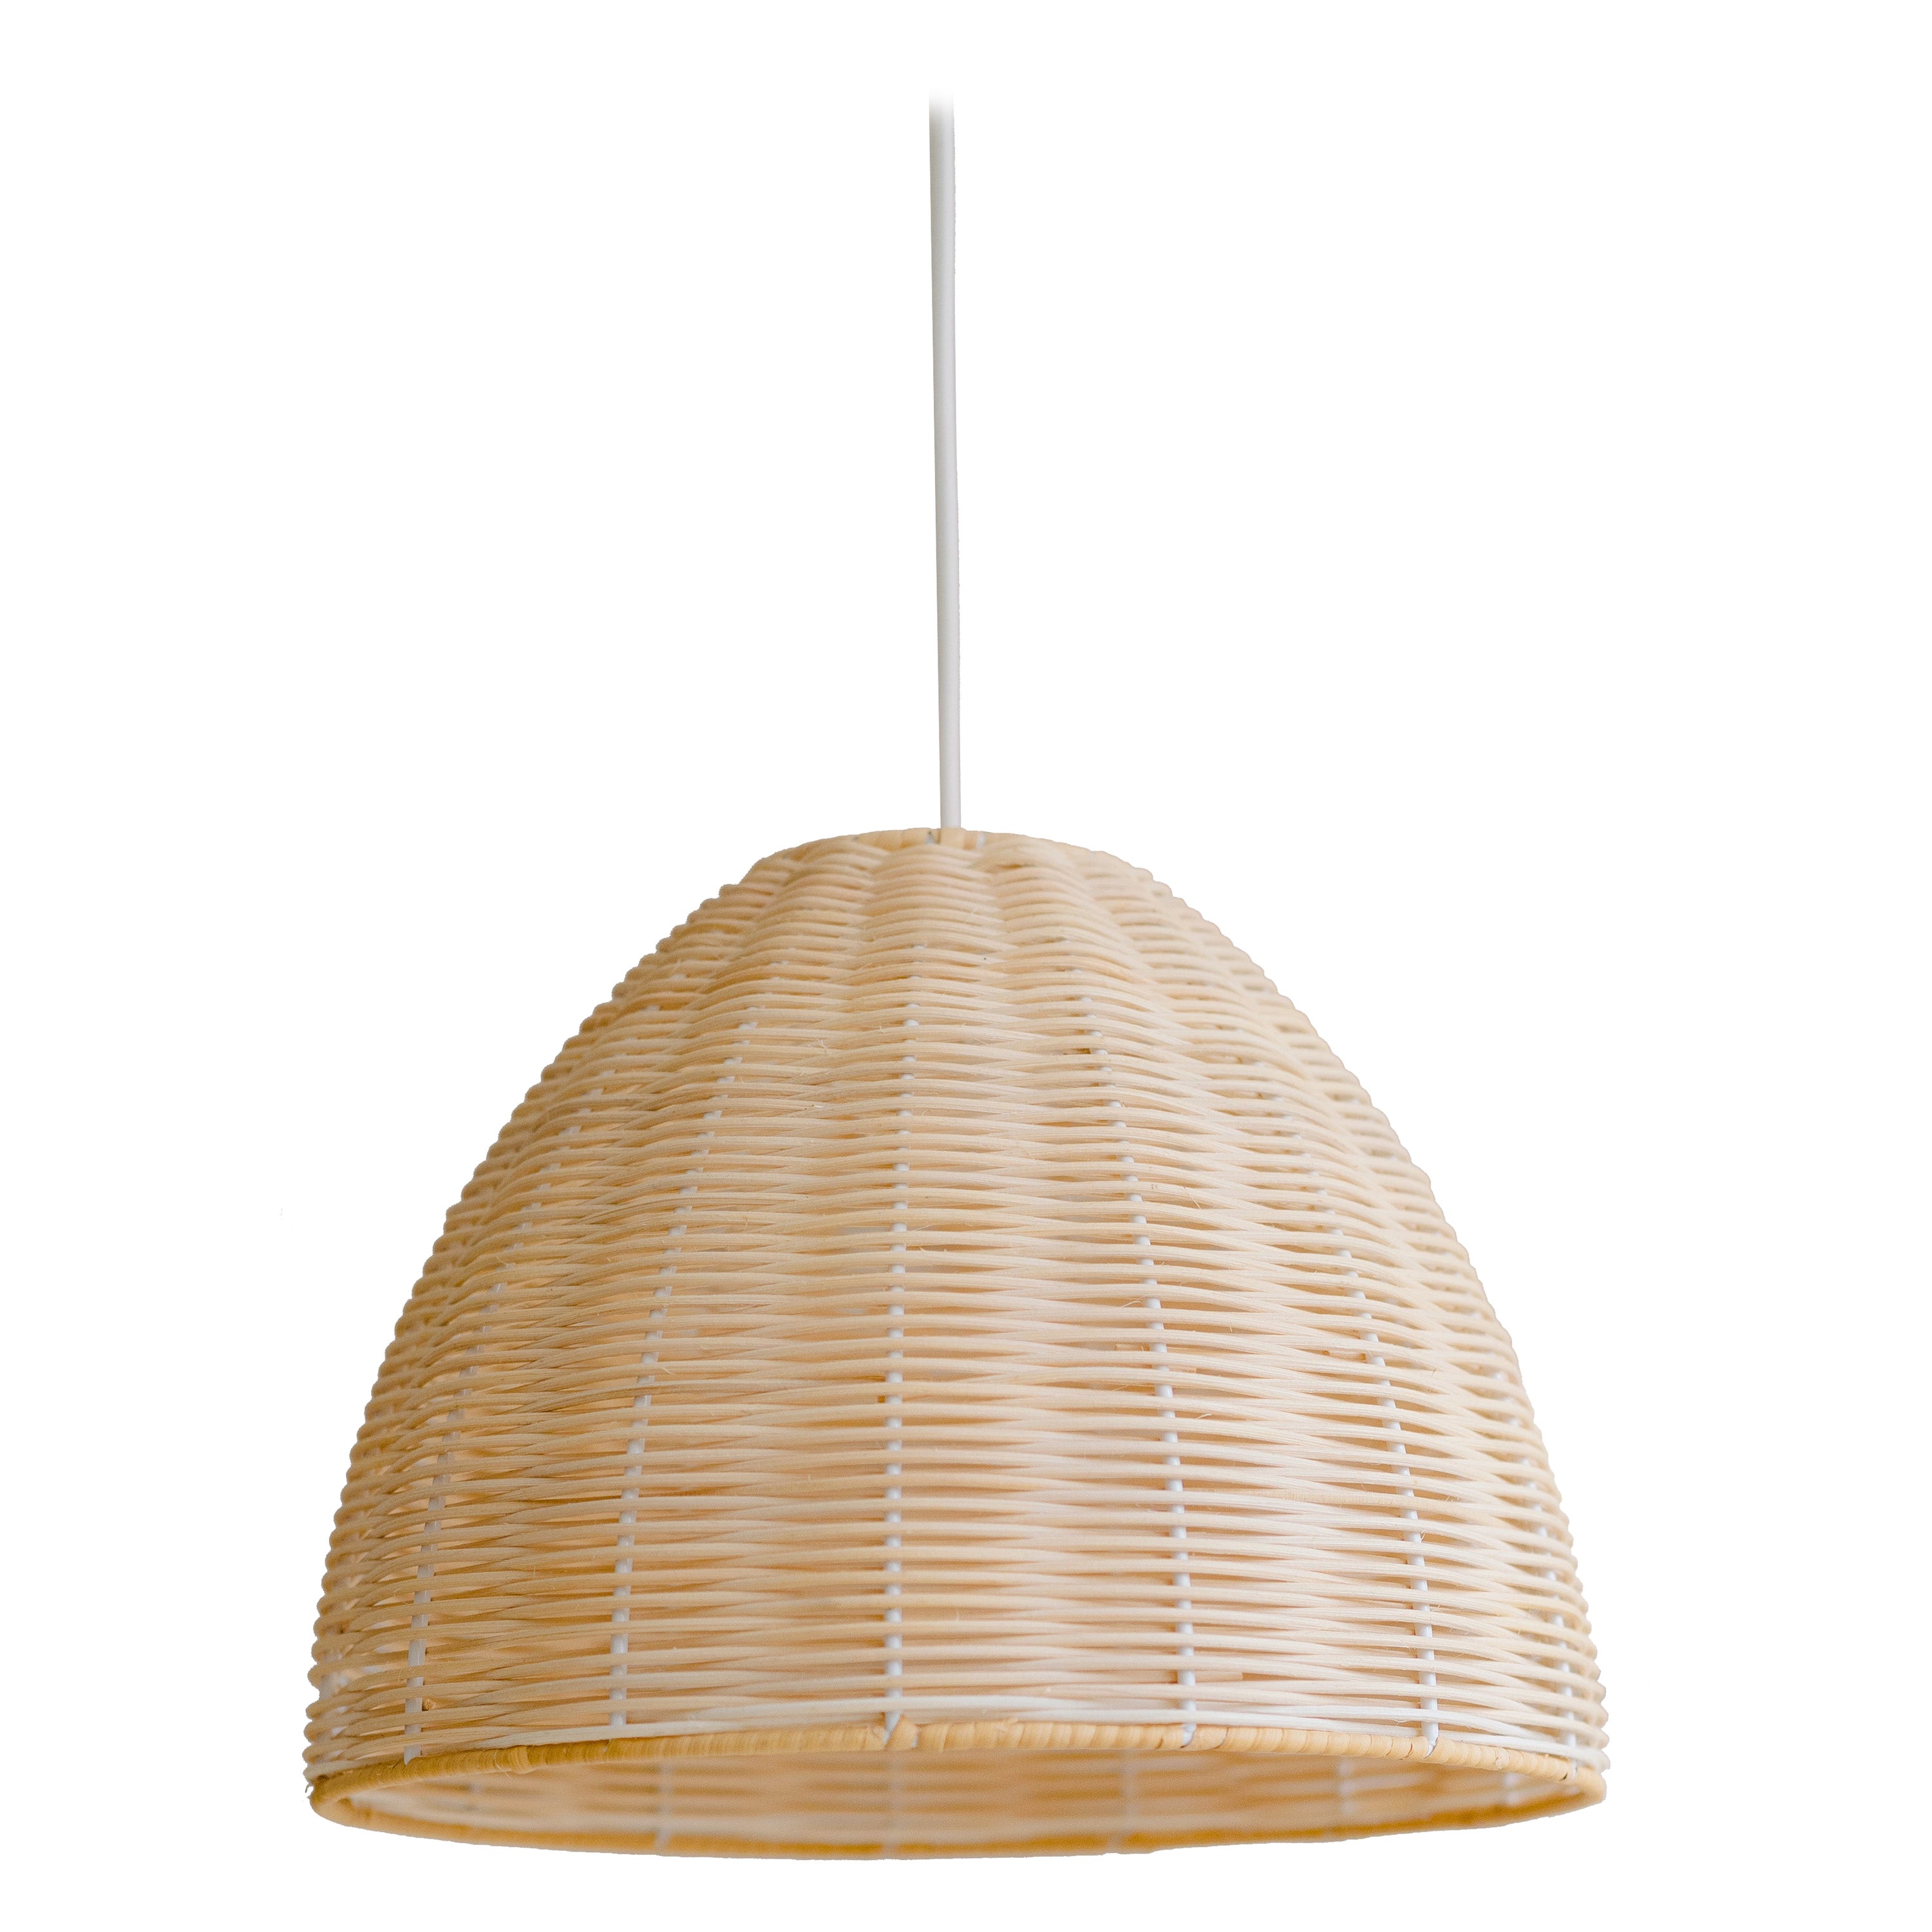 Contemporary, Handmade, Pendant Lamp, Rattan Dome, by Mediterranean Objects